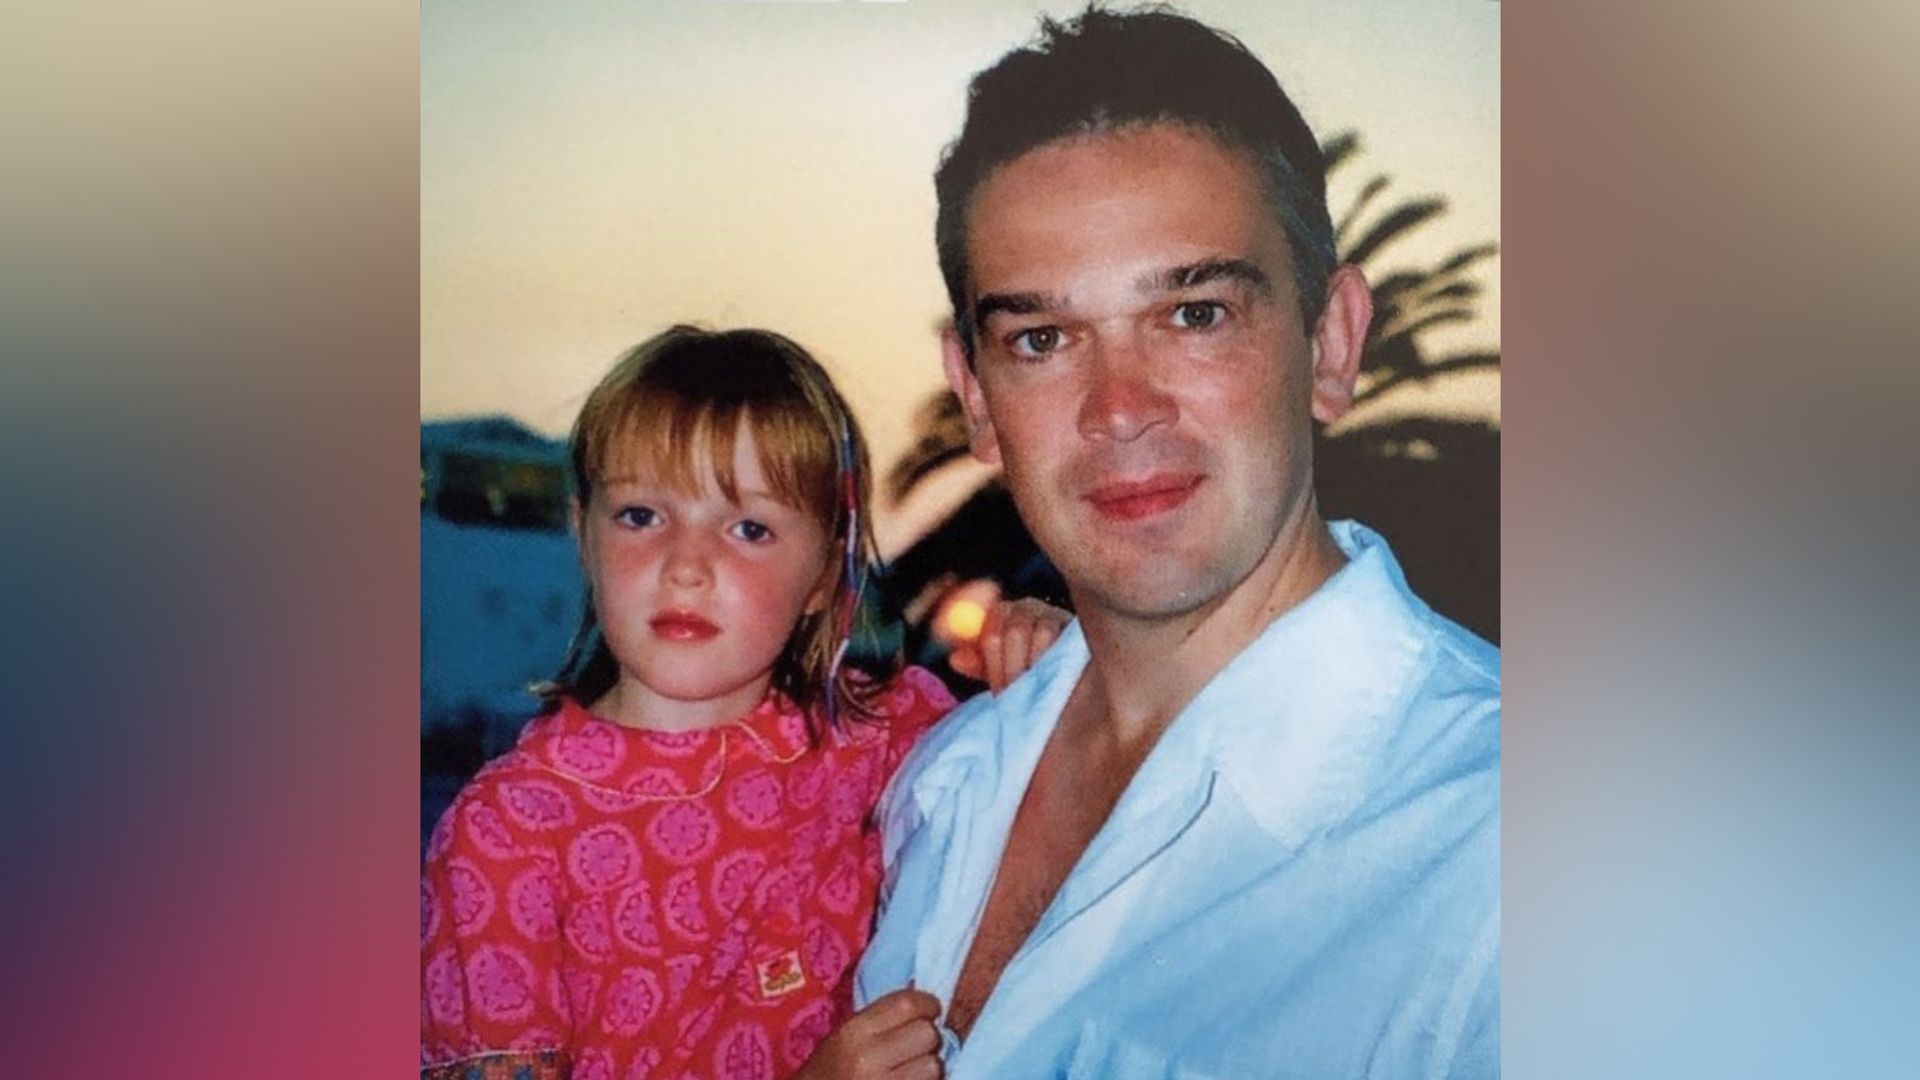 Phoebe Dynevor and her father